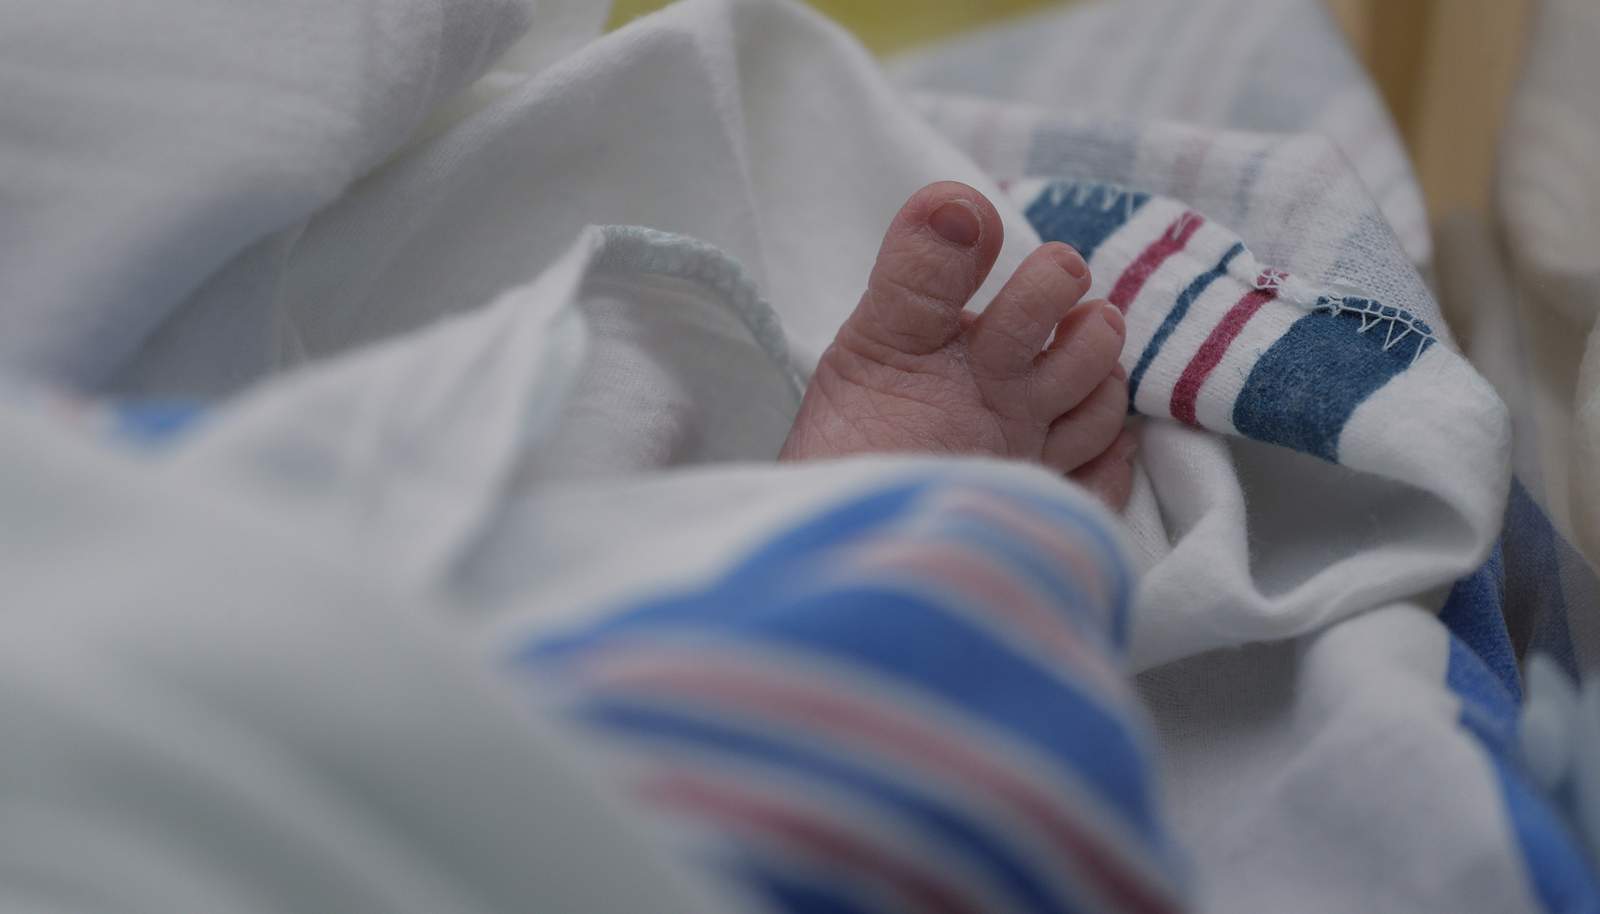 Florida couple: Hospital lost body of infant who died